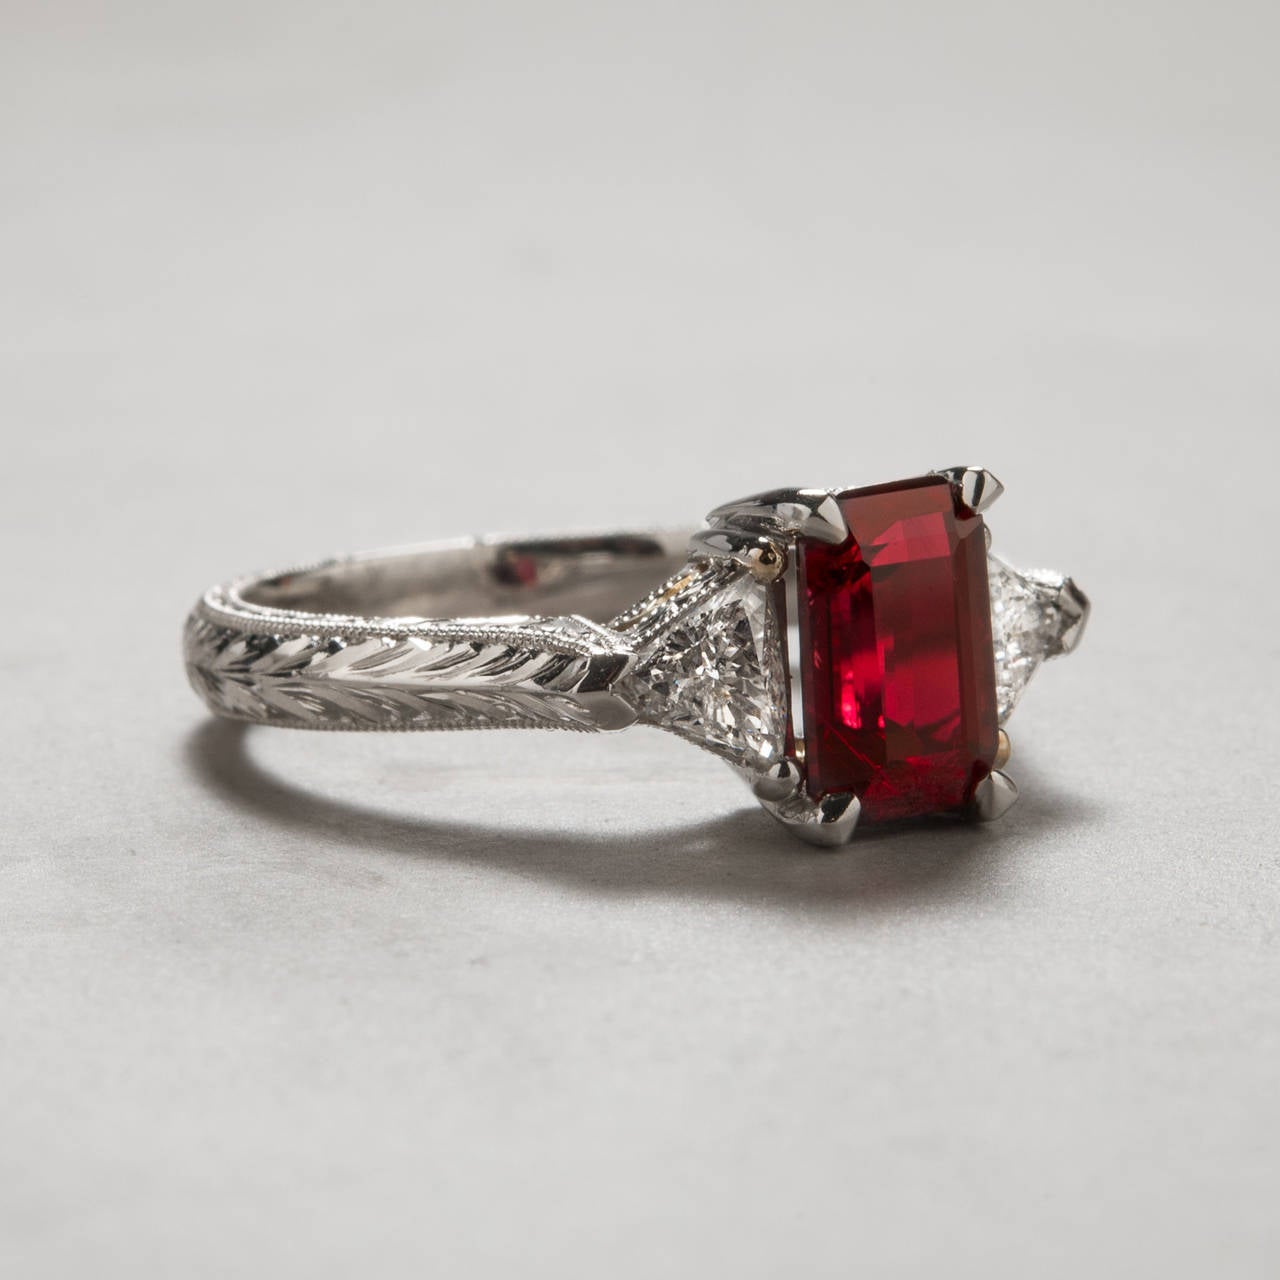 A beautiful ruby ring featuring intense true red color without a hint of pink. Delicate hand-engraved detailing covers the ring’s platinum shank. The 1.84 carat center ruby is accented by two diamonds weighing a total of .41 carats.